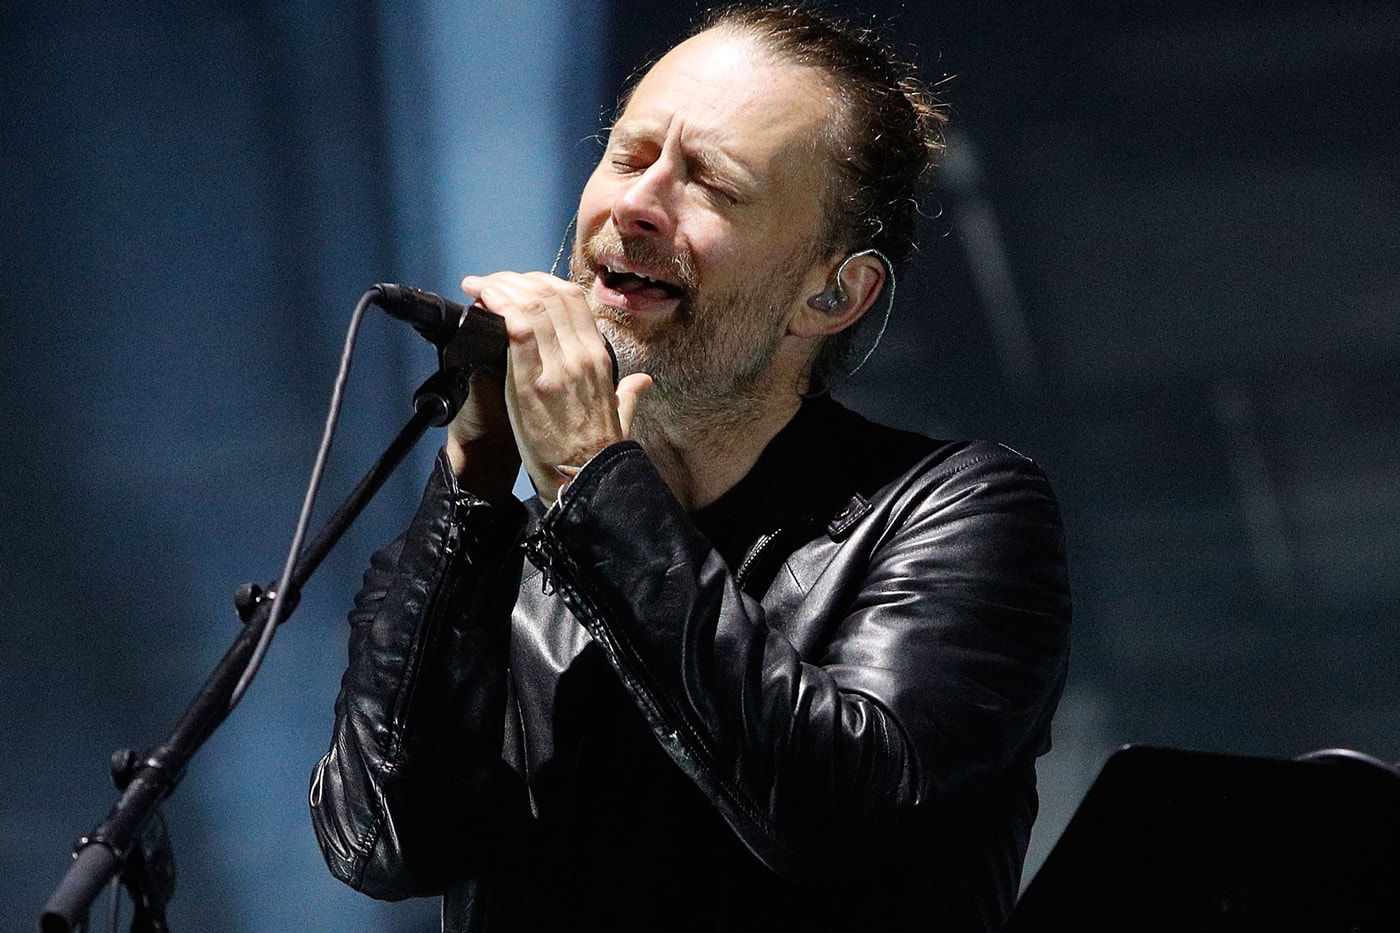 radiohead-a-moon-shaped-pool-streaming-event-glass-eyes-video